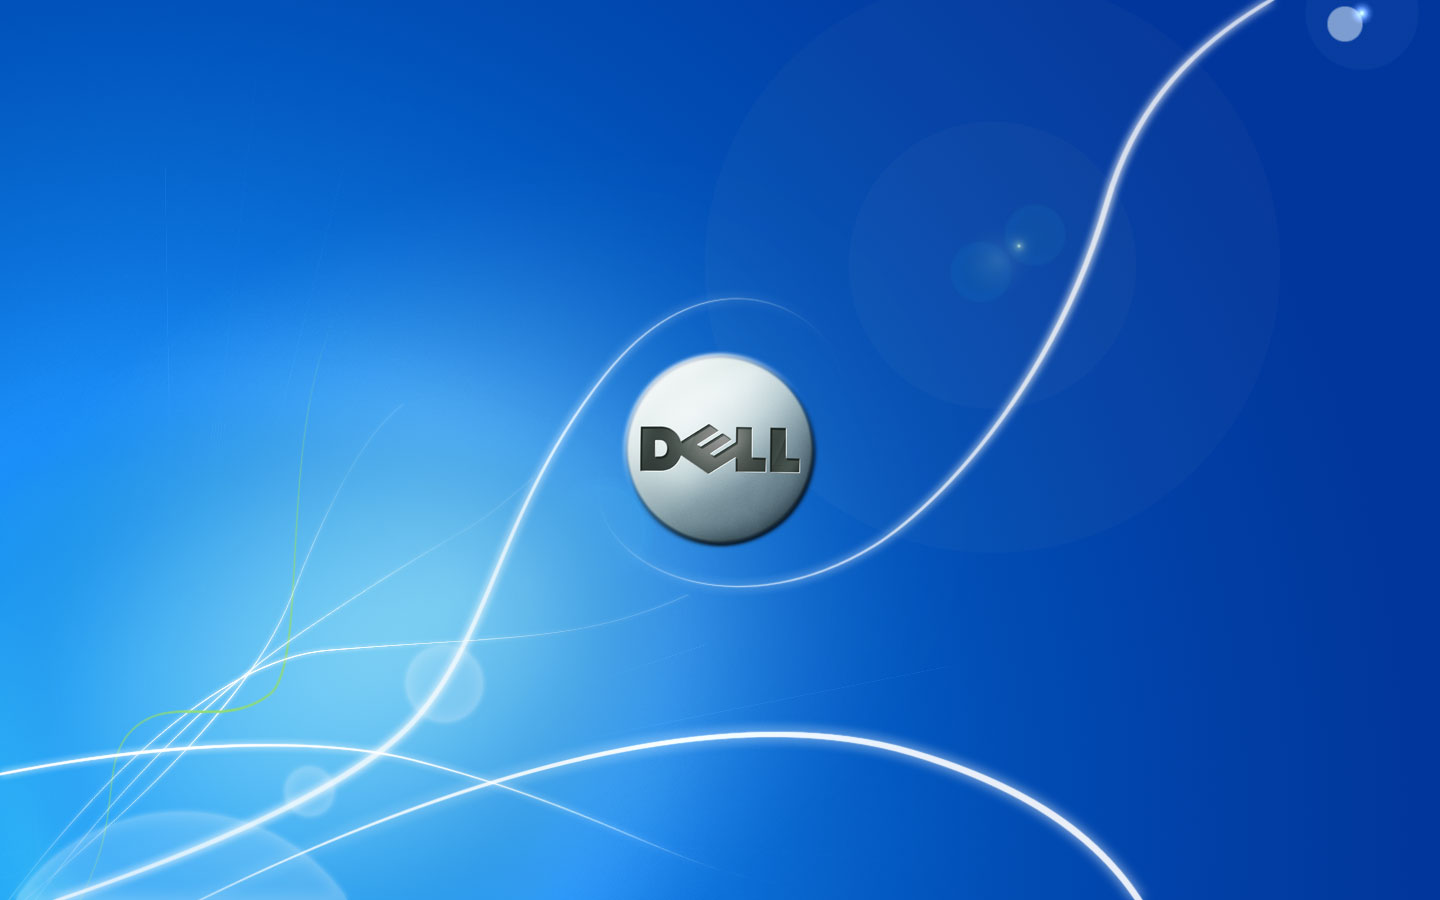 🔥 Download Dell Wallpaper Background by @mreyes28 | Dell HD Wallpapers ...